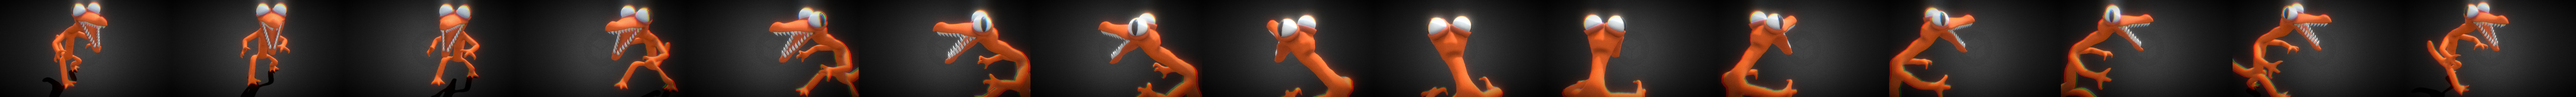 Orange from rainbow friends (rigged) - 3D model by yes [6aea622